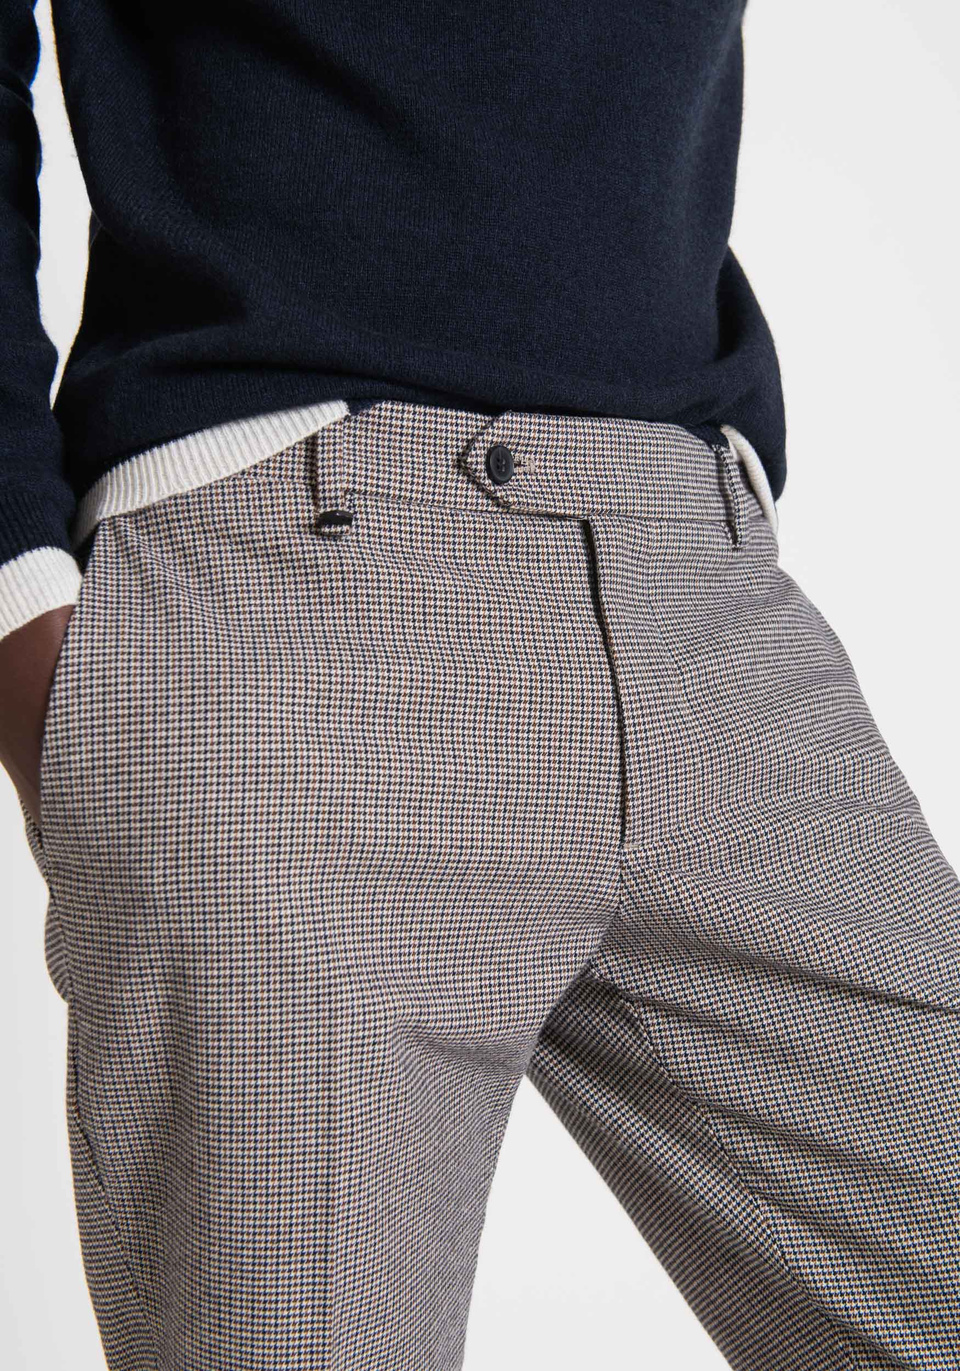 BRYAN SKINNY FIT HOUNDSTOOTH TROUSERS - Antony Morato Online Shop